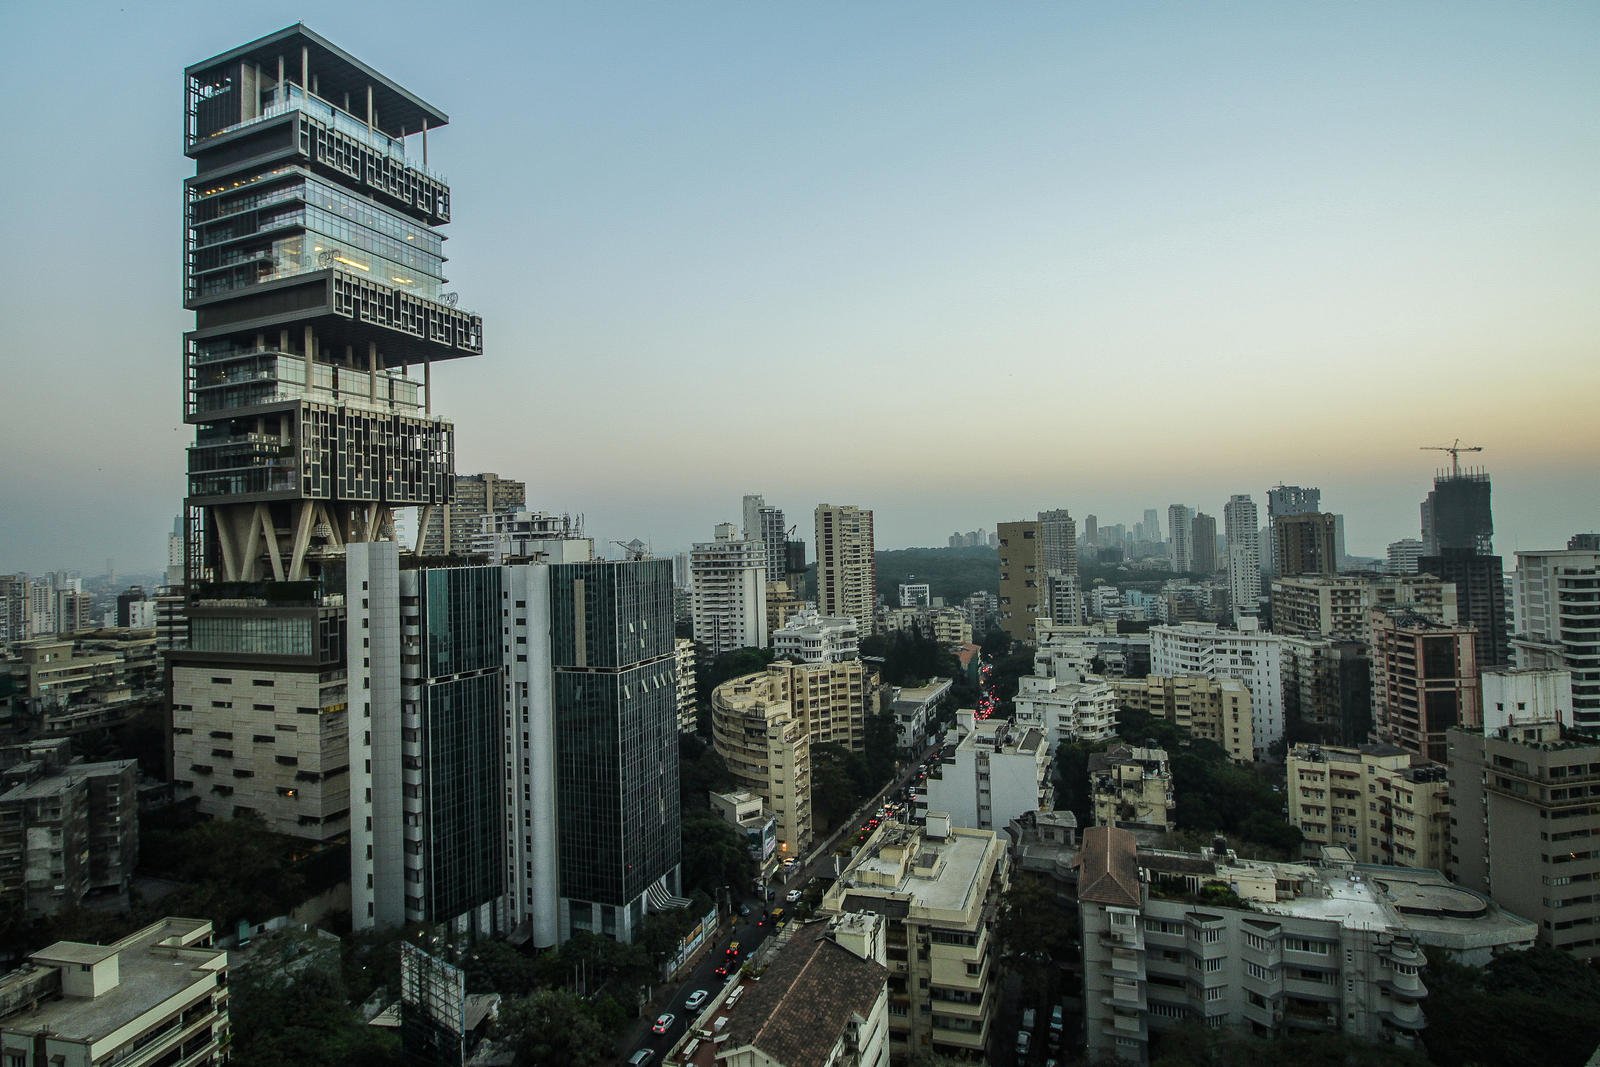 Indian billionaire Mukesh Ambani to install rotating beds and retractable roofs in his $4.7 skyscraper home so his grandkids can soak in the morning sun – To mark their births the joyous businessman will donate 300 kgs of gold to charities.